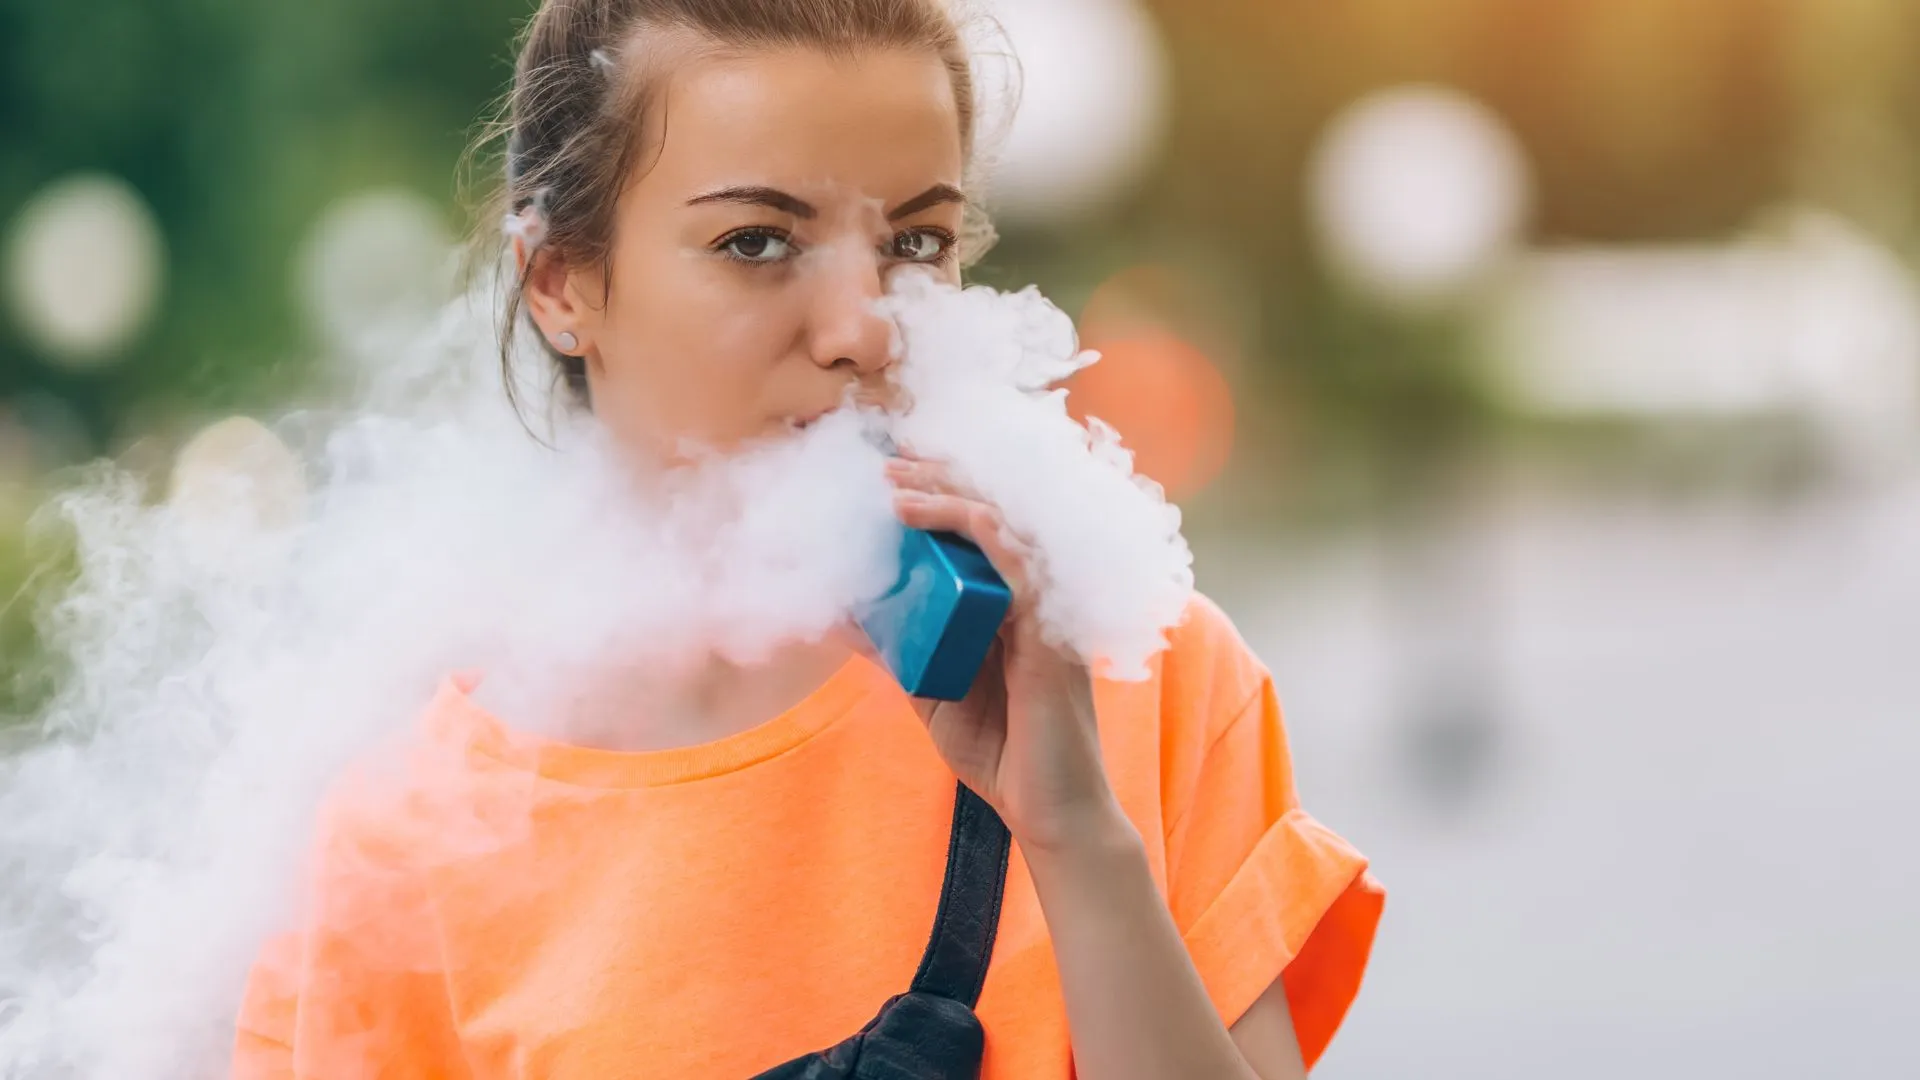 Is Vaping Bad for Your Teeth